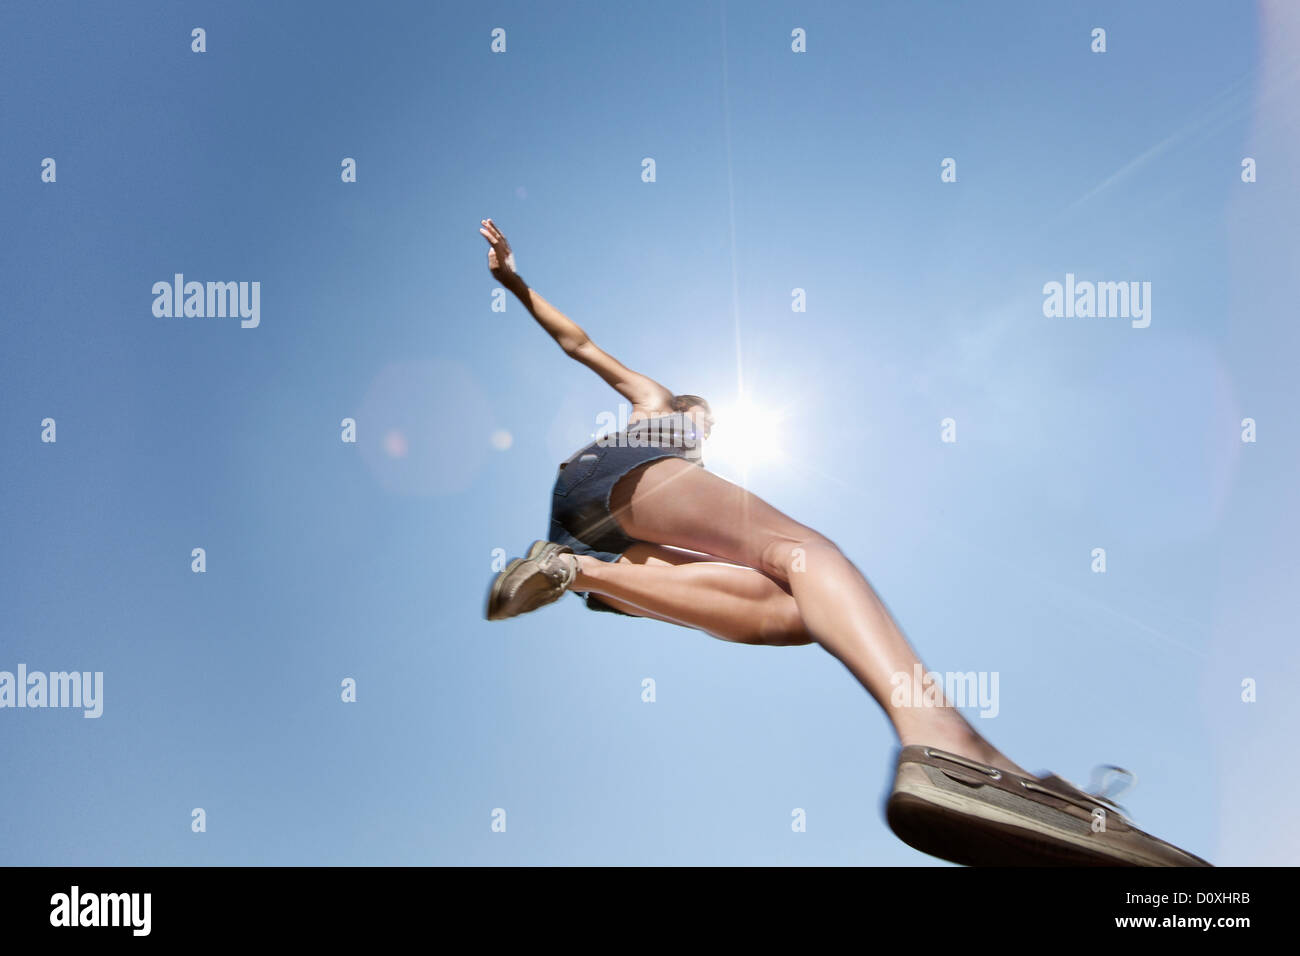 Girl jumping against blue sky, low angle Stock Photo